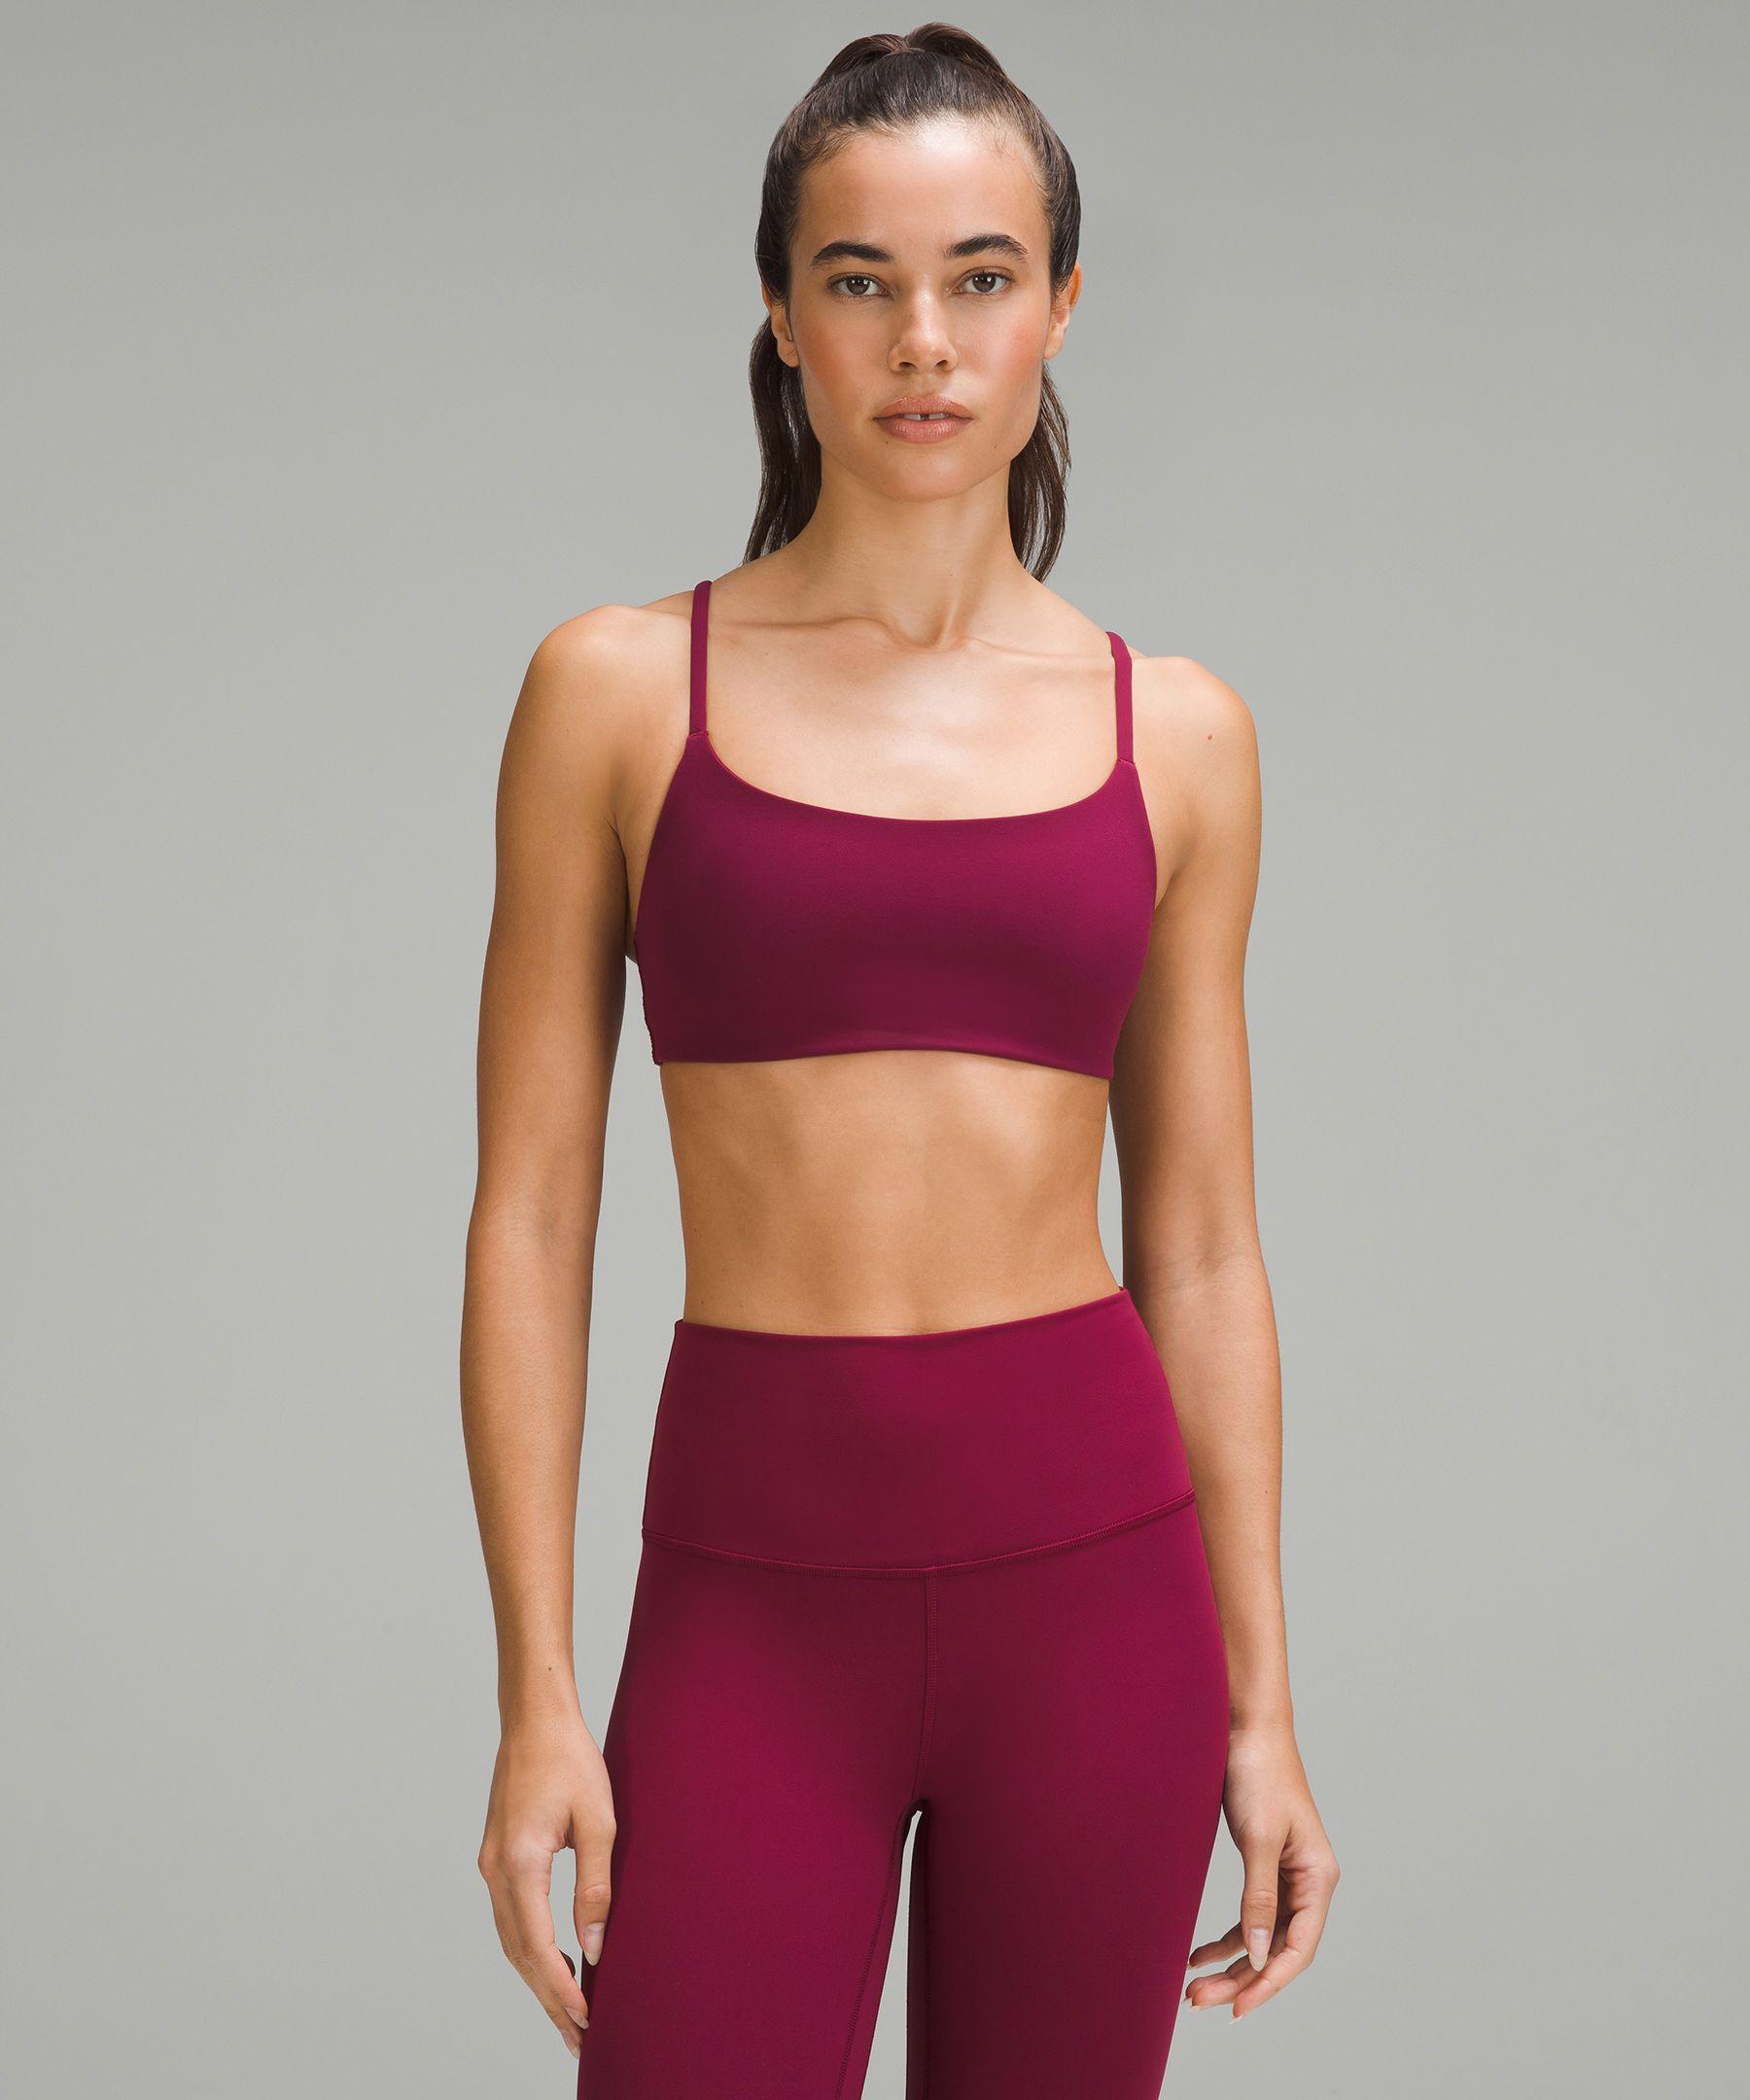 lululemon athletica Wunder Train Strappy Racer Bra Light Support, A/b Cup  in Red